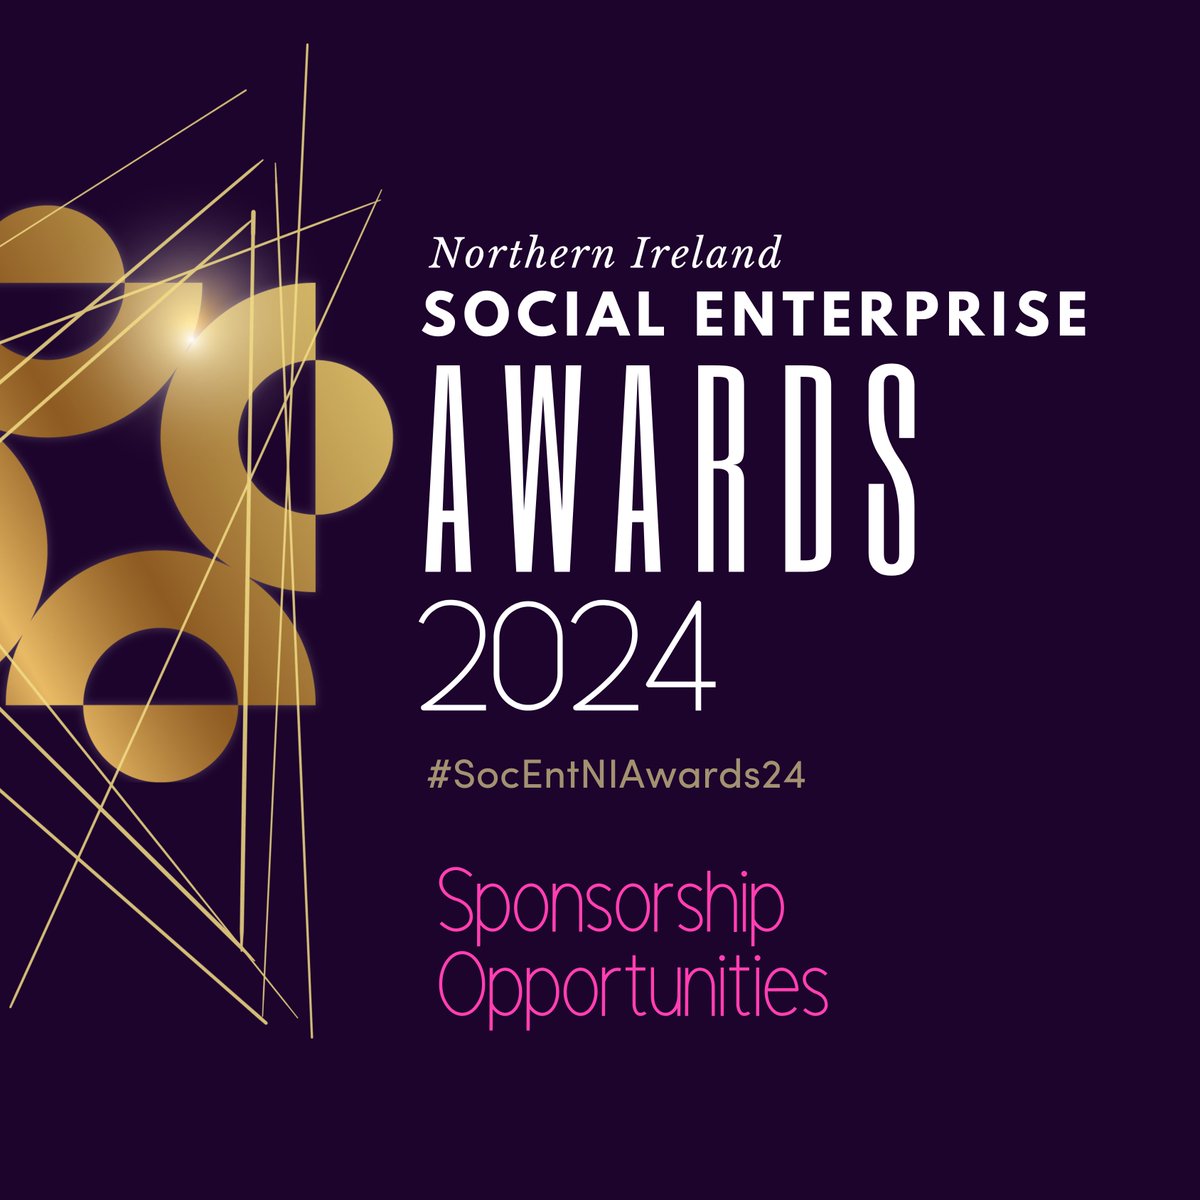 #SocEntNIAwards24 will be open for applications from Monday 20th May 9am ☀️ 

We have some amazing Sponsorship Opportunities and various packages available for branding and marketing your own amazing business.  

Email catherine@socialenterpriseni.org for more information.